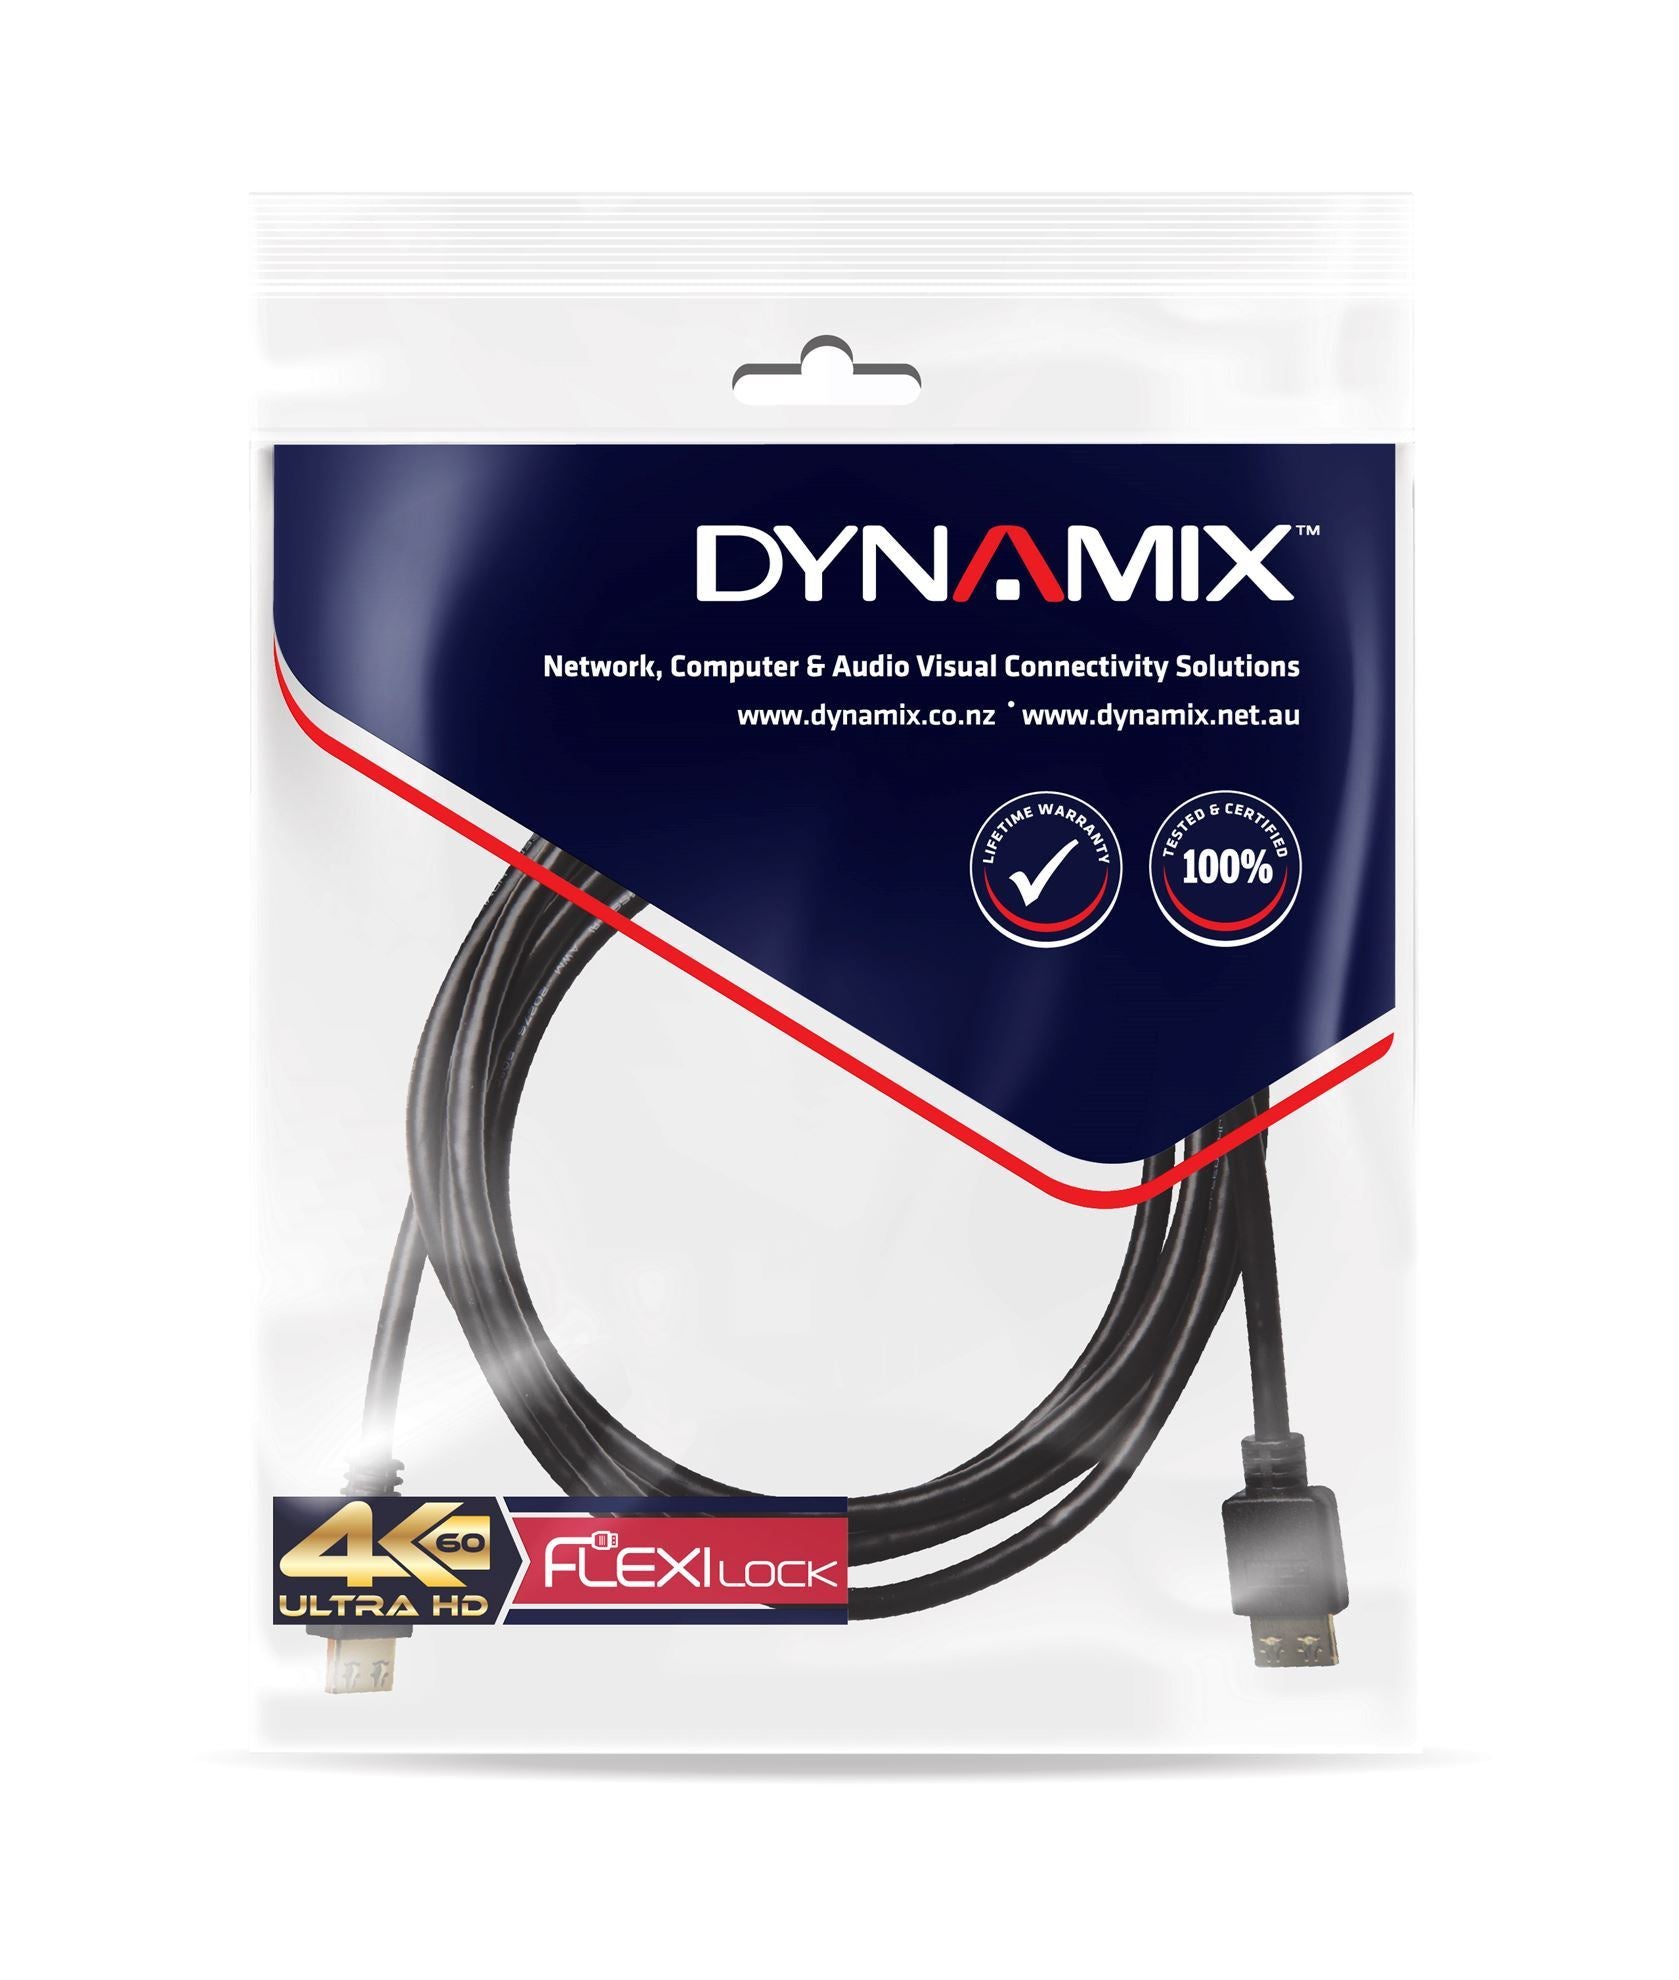 DYNAMIX_4m_HDMI_High_Speed_18Gbps_Flexi_Lock_Cable_with_Ethernet._Max_Res:_4K2K@30/60Hz._32_Audio_channels._10/12bit_colour_depth._Supports_CEC_2.0,_3D,_ARC,_Ethernet_2x_simultaneous_video_streams. 742